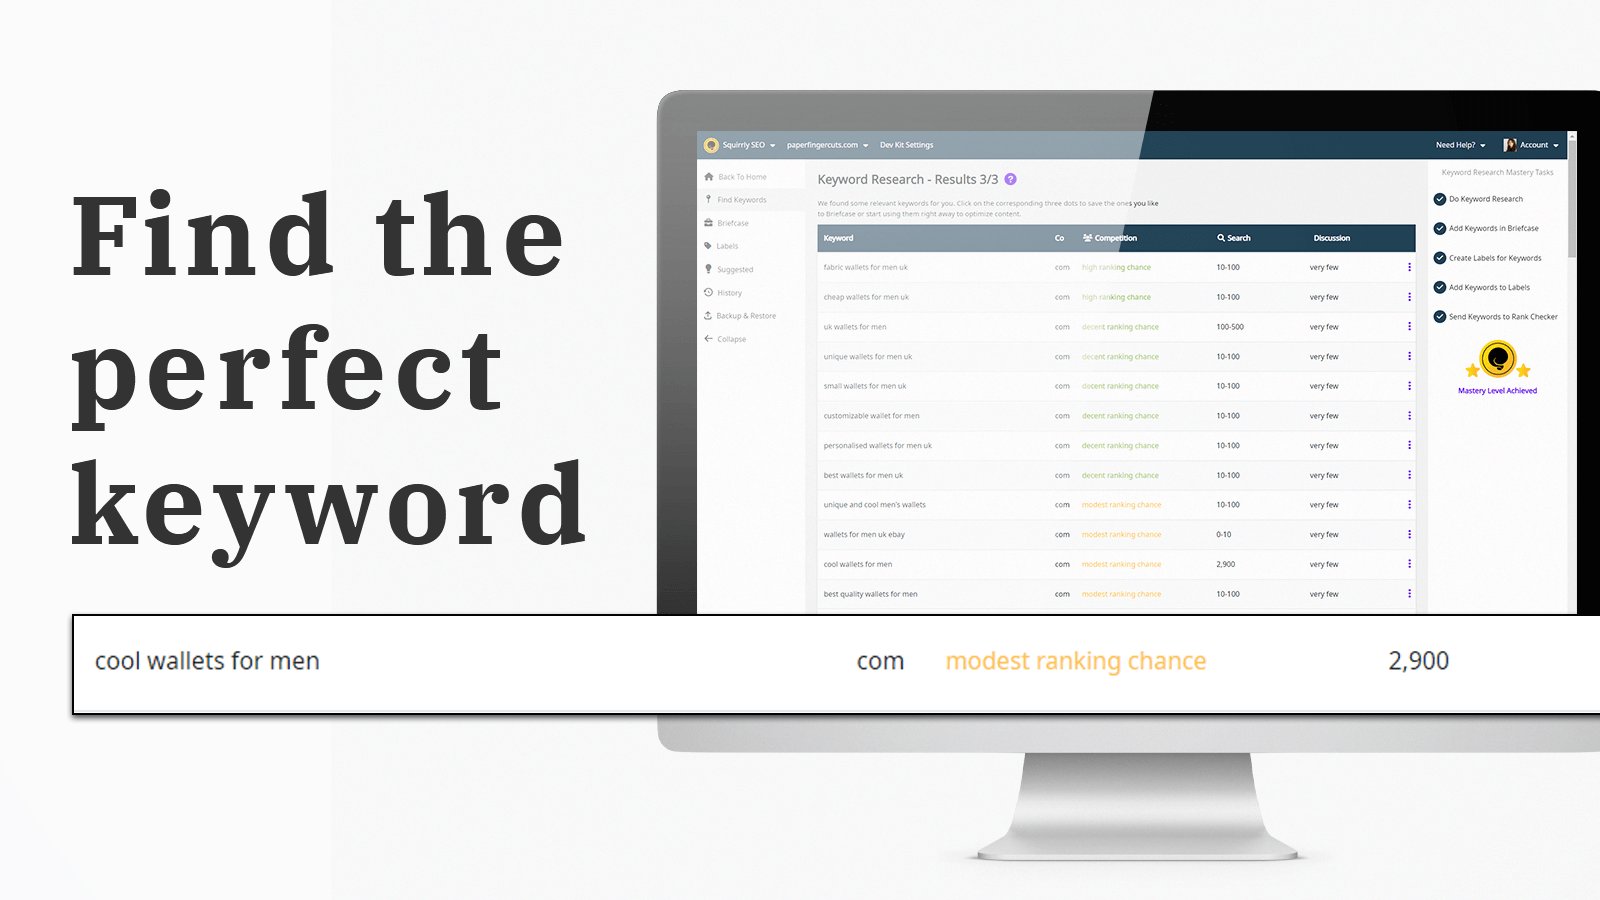 Find the perfect keyword for seo. Target seo kw that bring sales